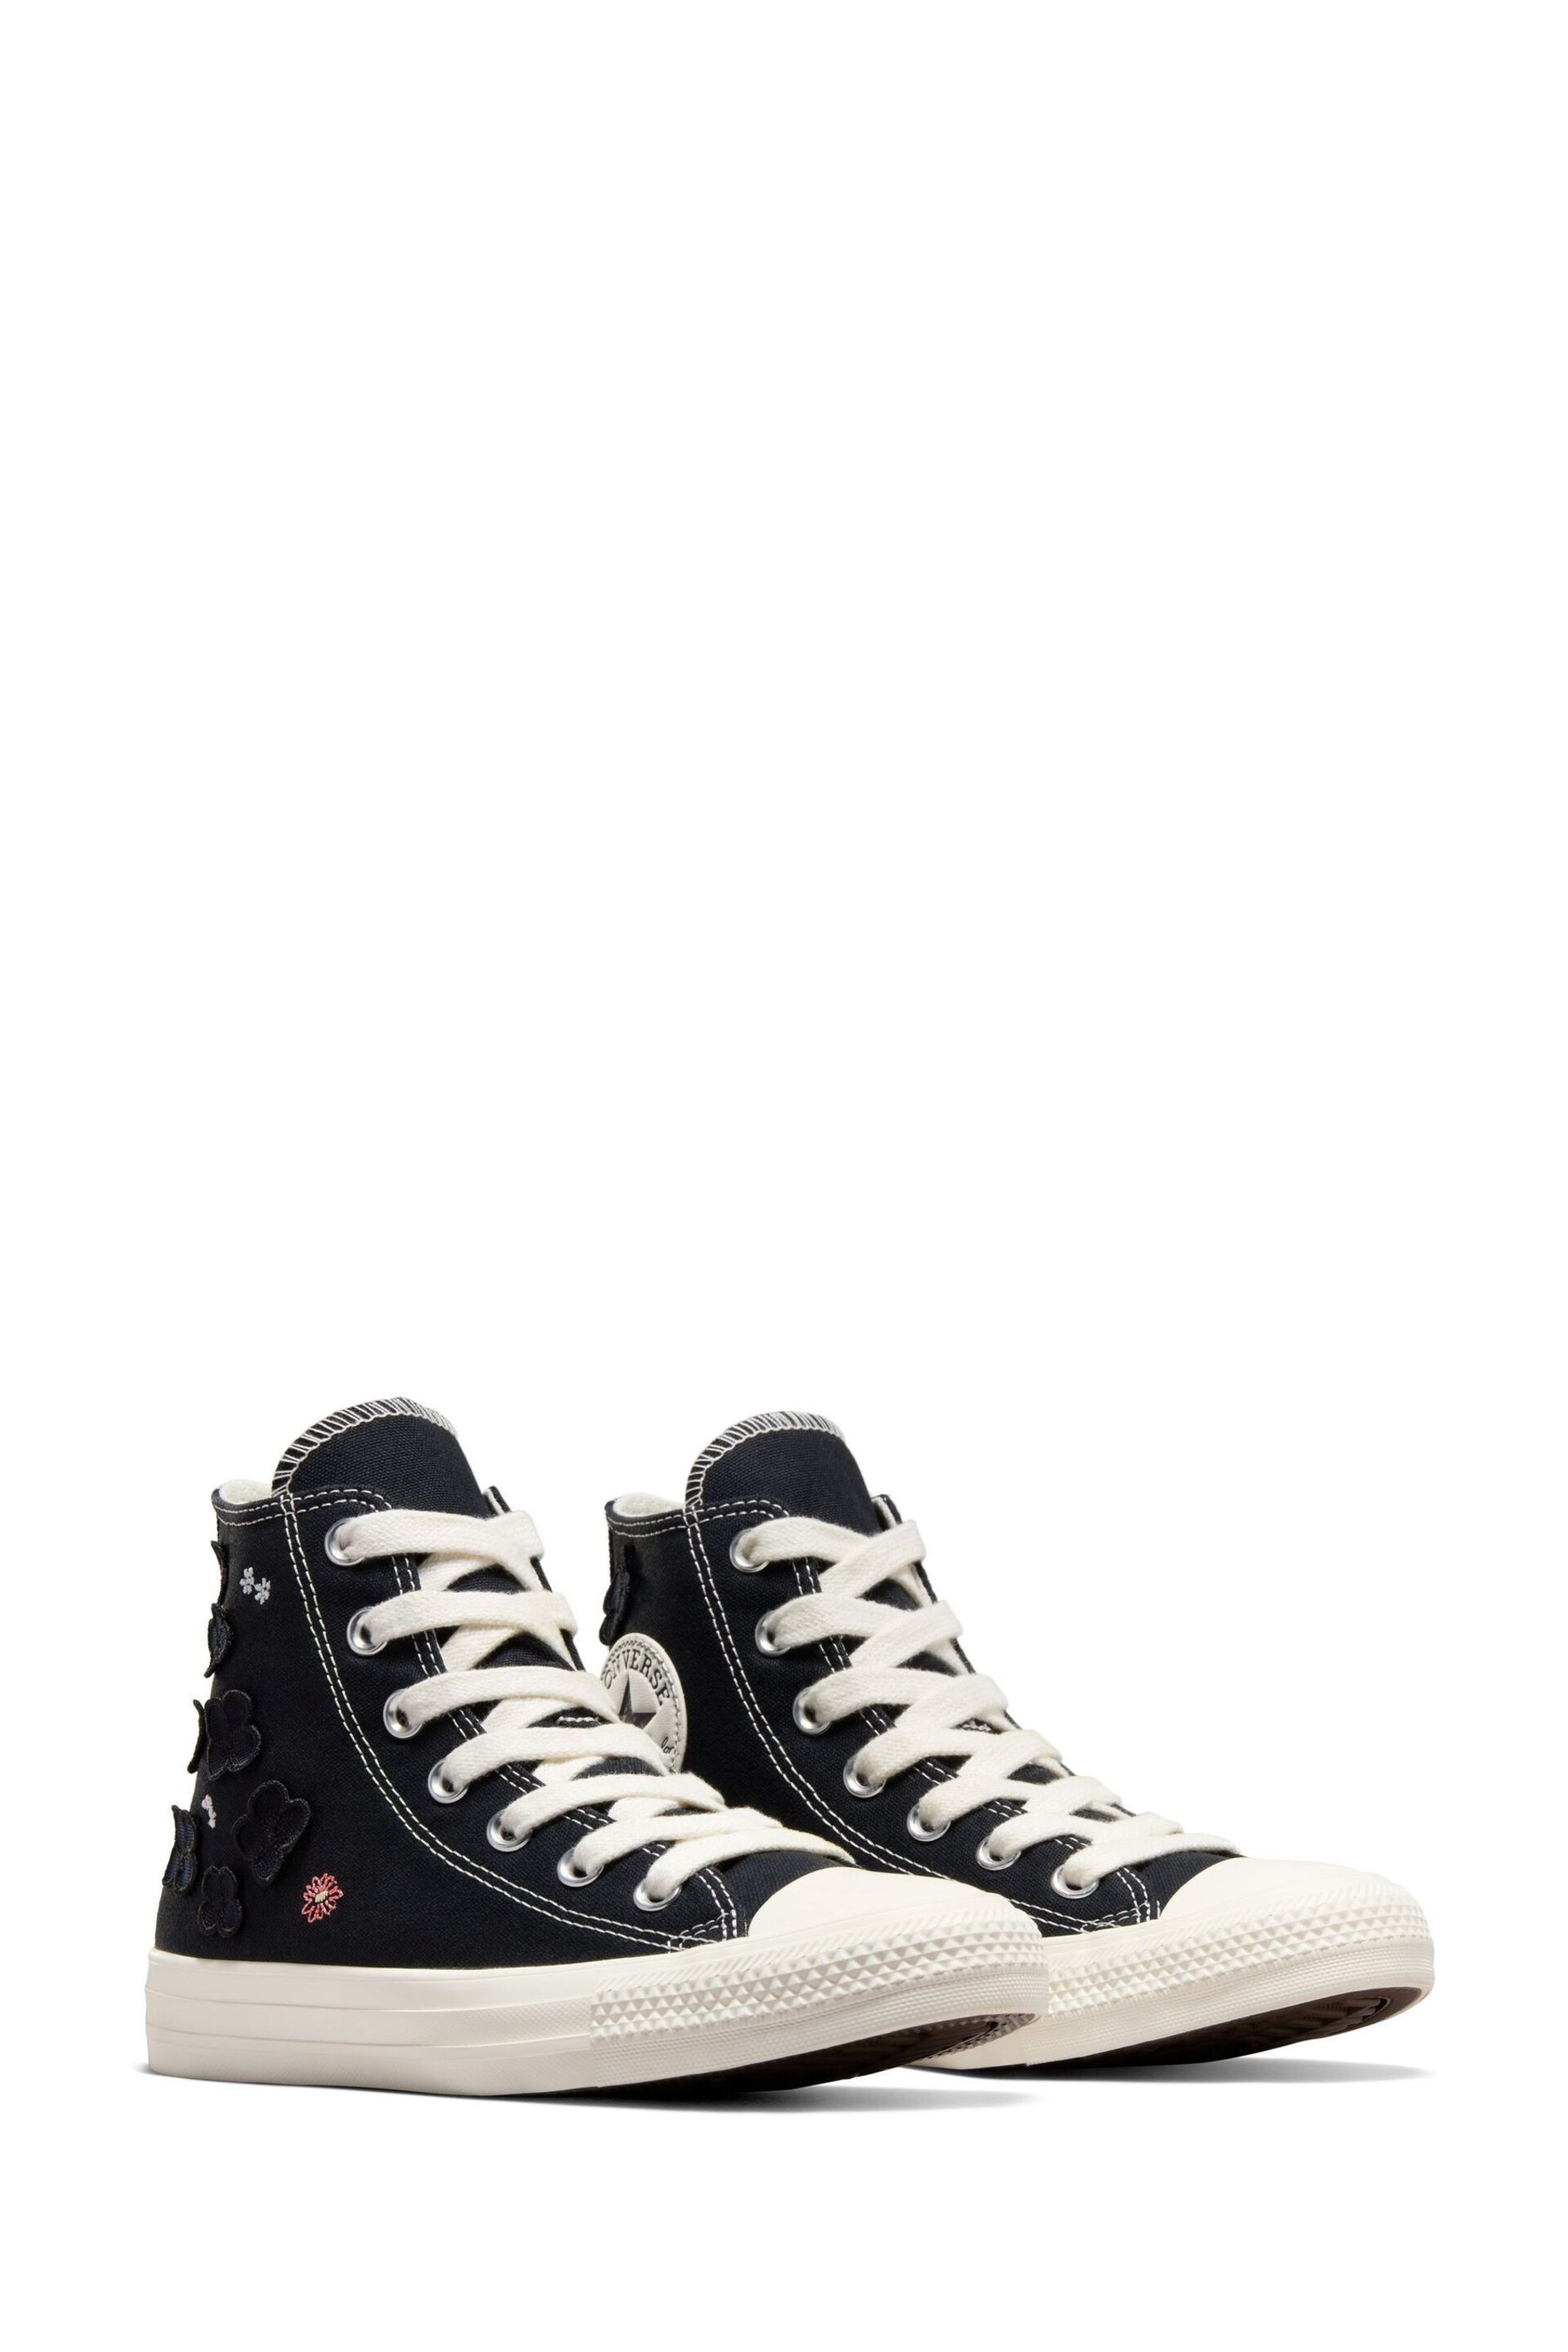 Converse Black Floral Embroidered High Top Trainers - Image 7 of 13